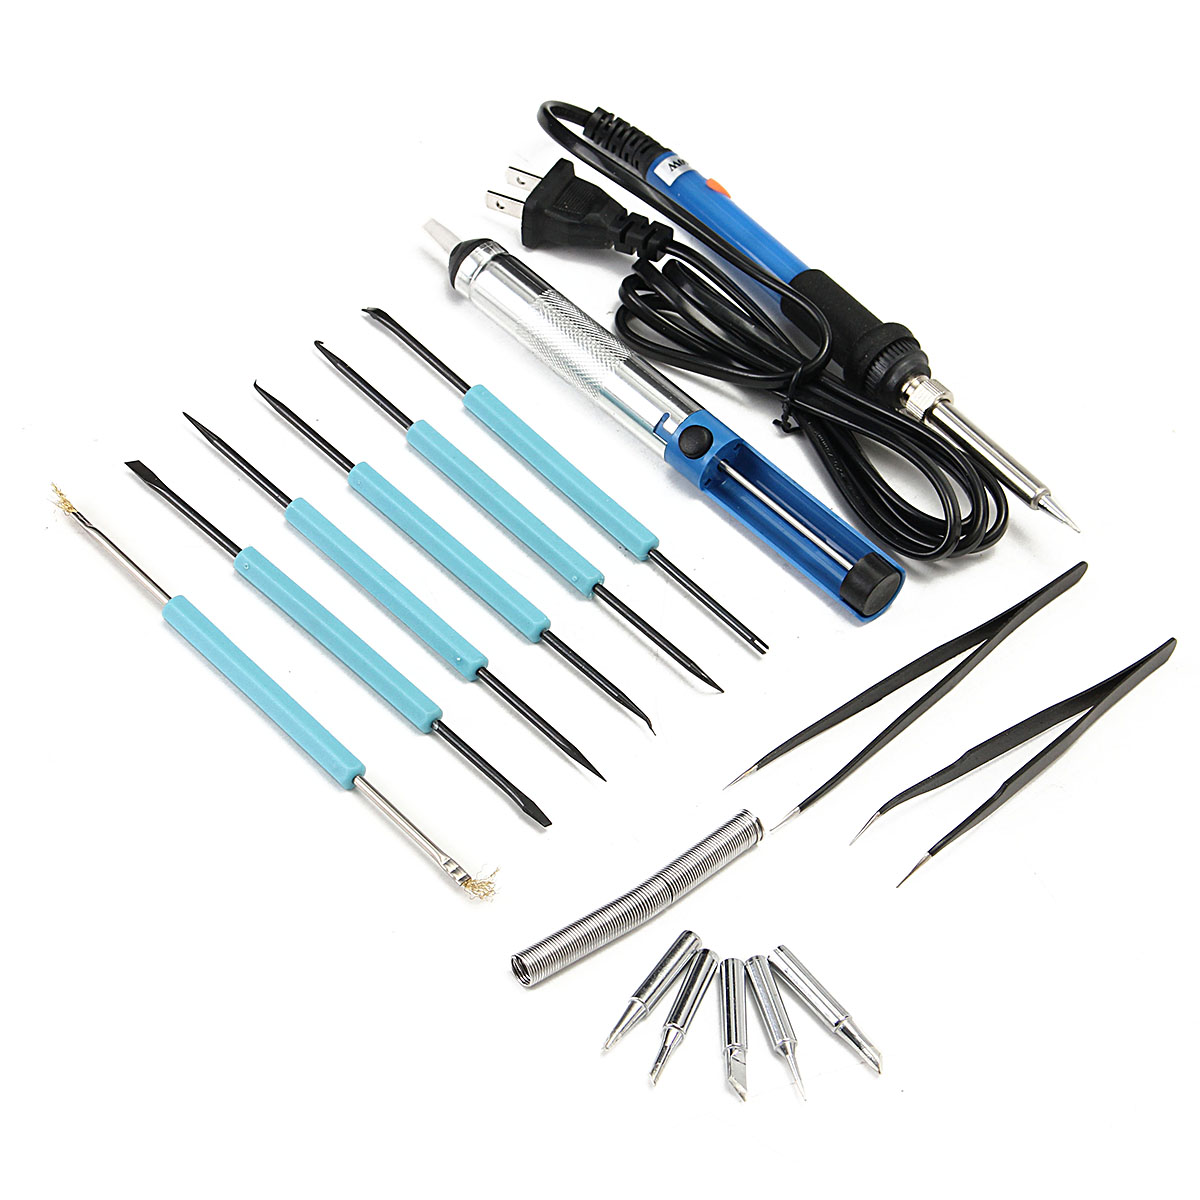 Adjustable-Electric-Temperature-Welding-Soldering-Iron-Tools-Kit-60W-110V-1300320-6